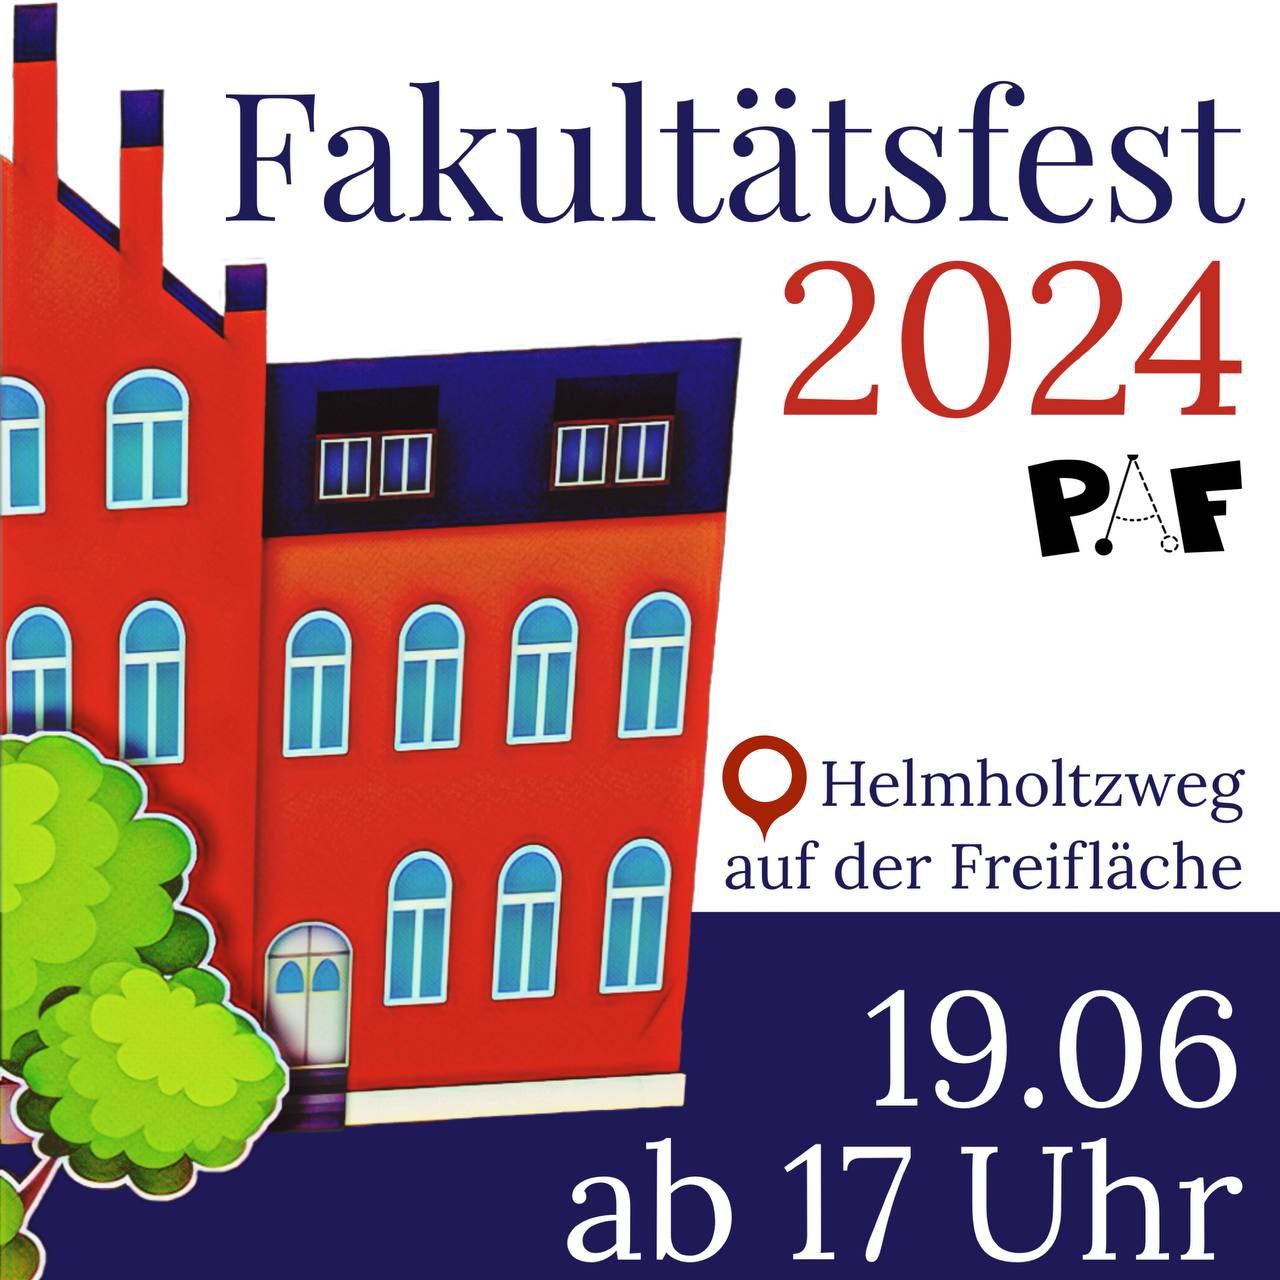 Read more about the article Fakultätsfest am 19.06.2024